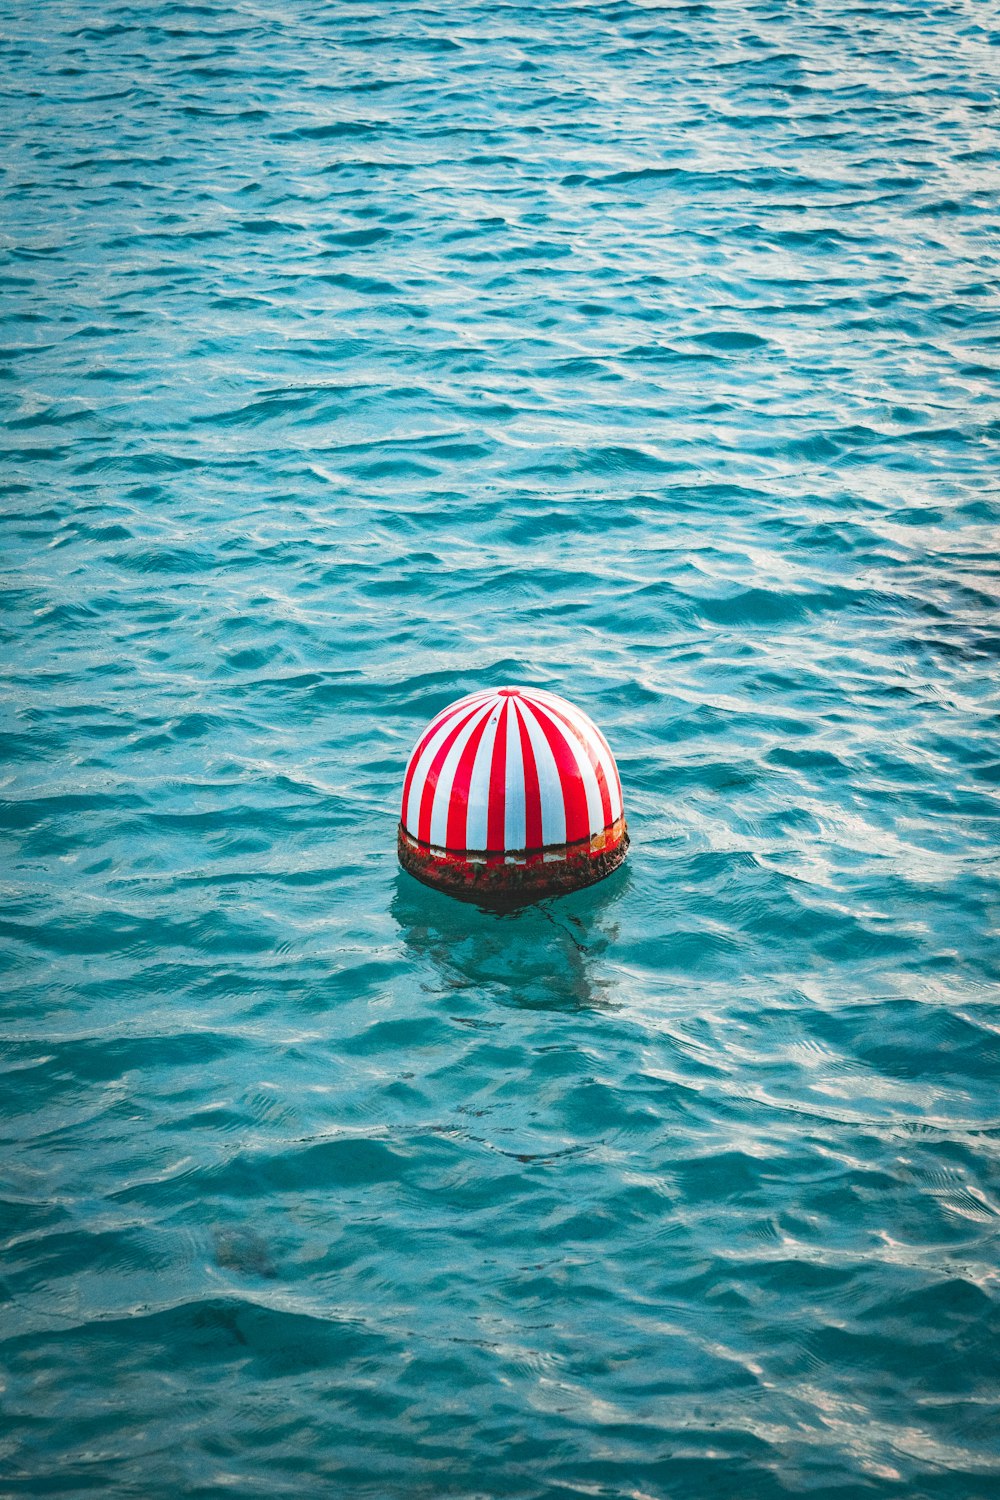 red and white buoy on body of water during daytime